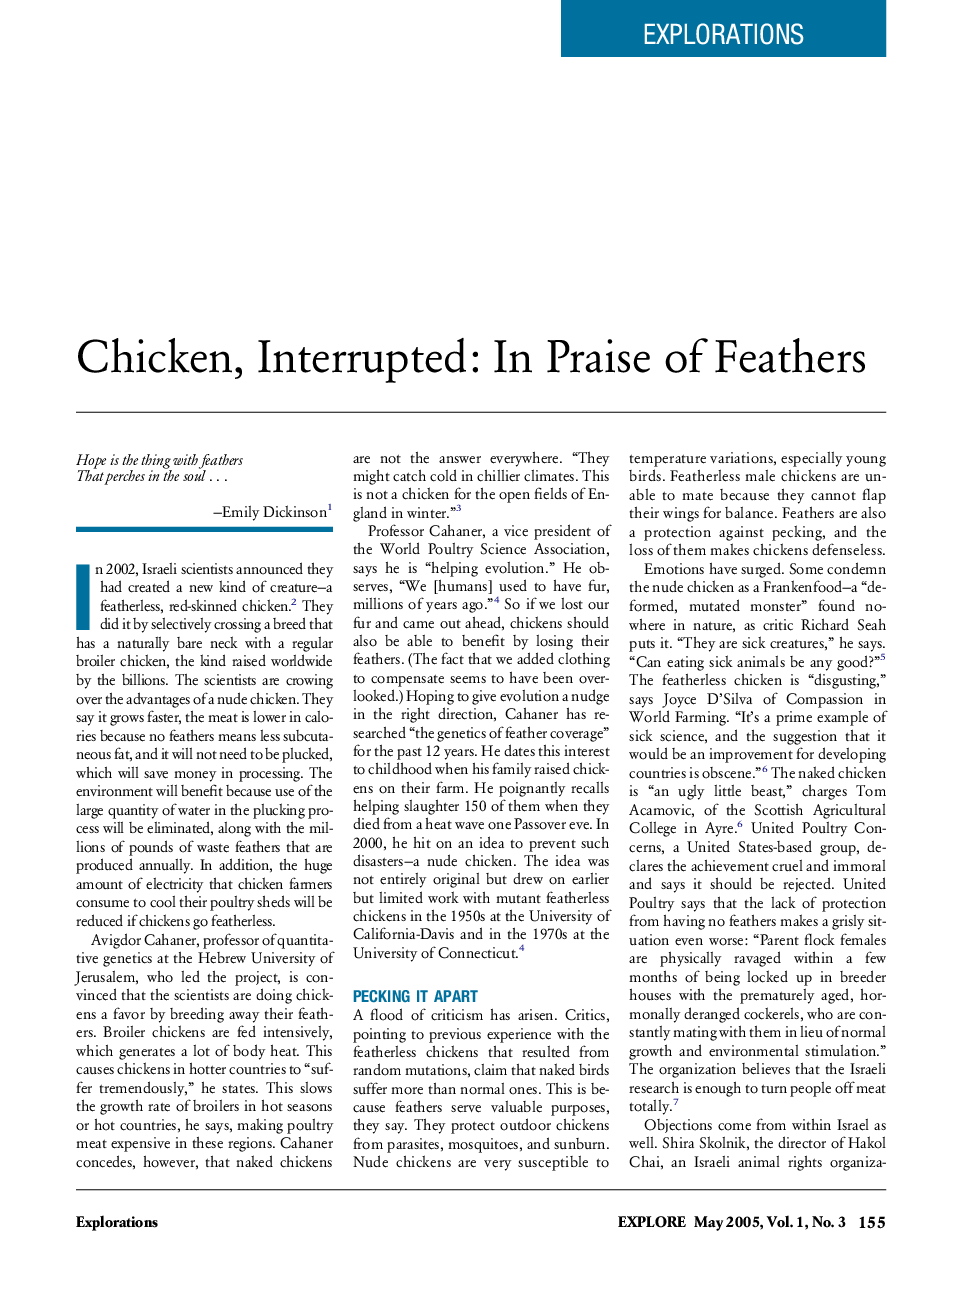 Chicken, Interrupted: In Praise of Feathers